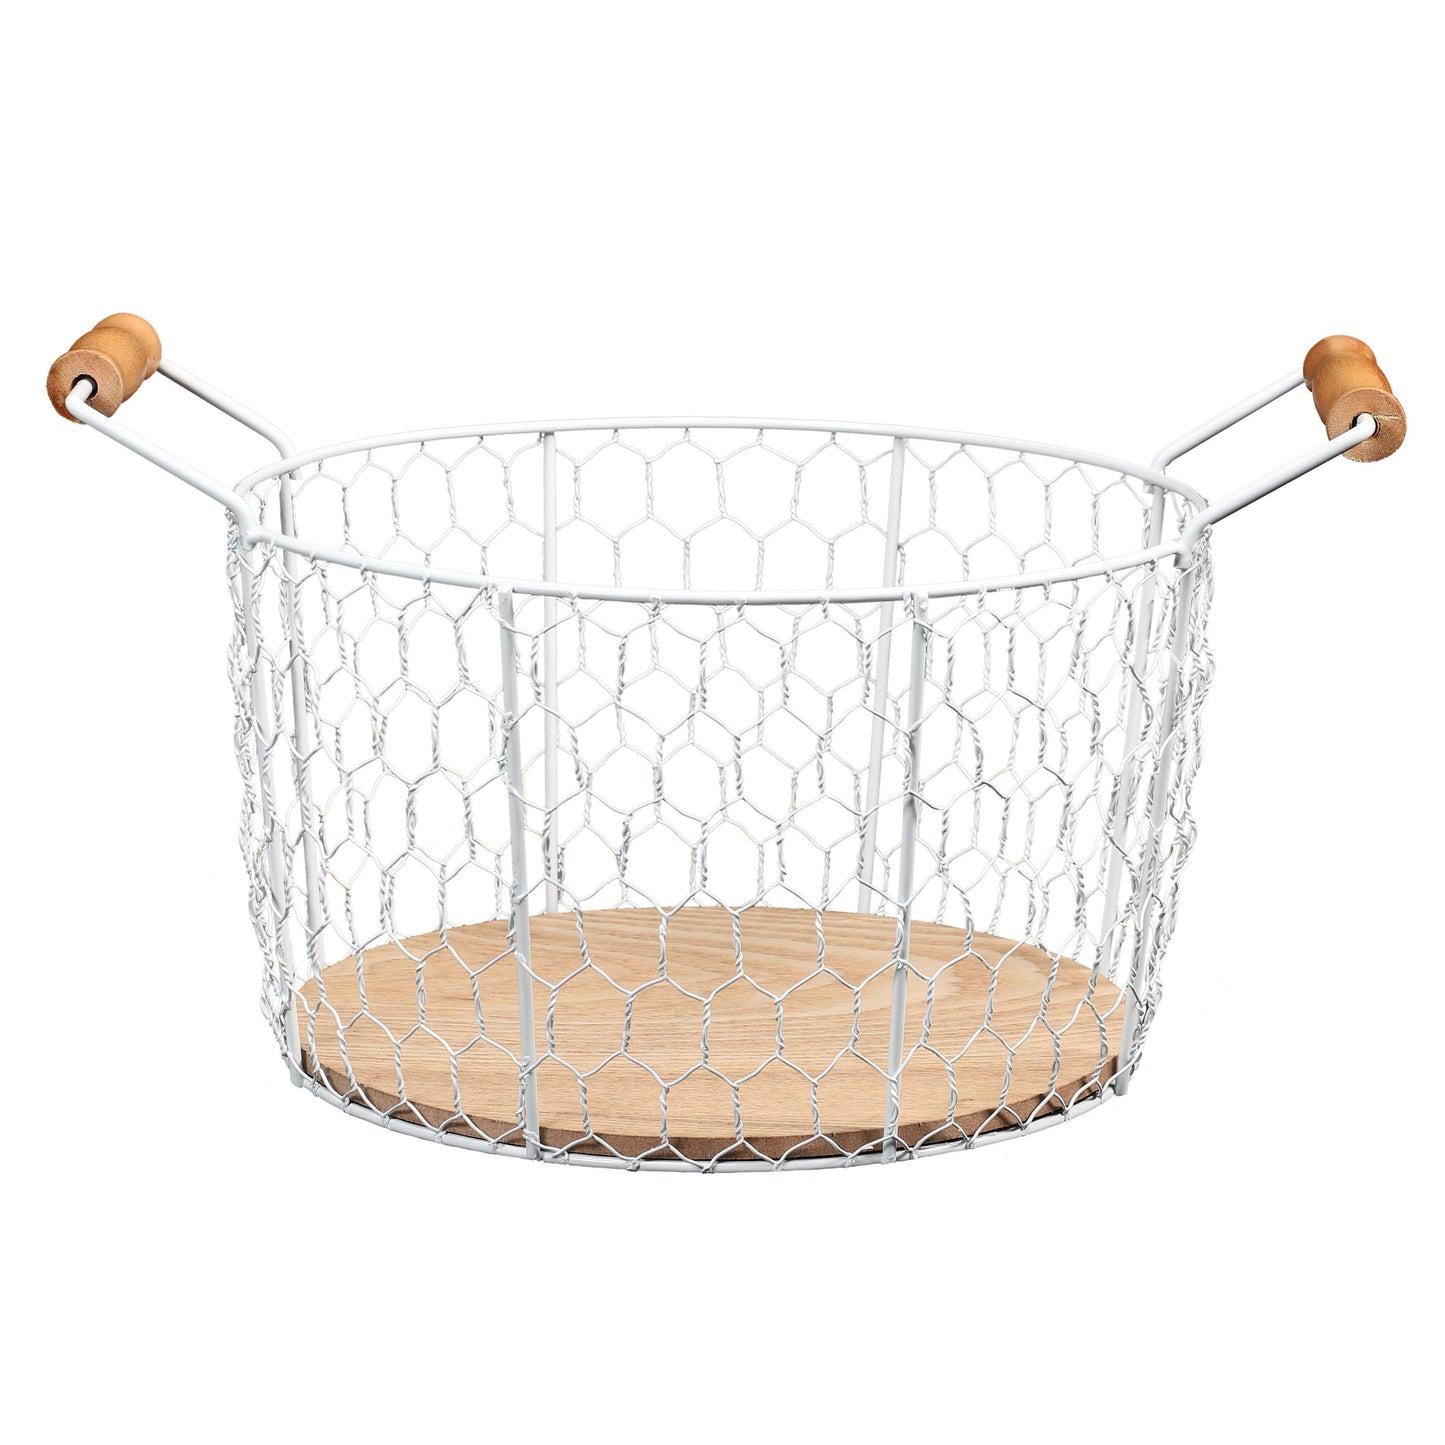 6.25" Chicken Wire Basket with Wood Look Base with Handles